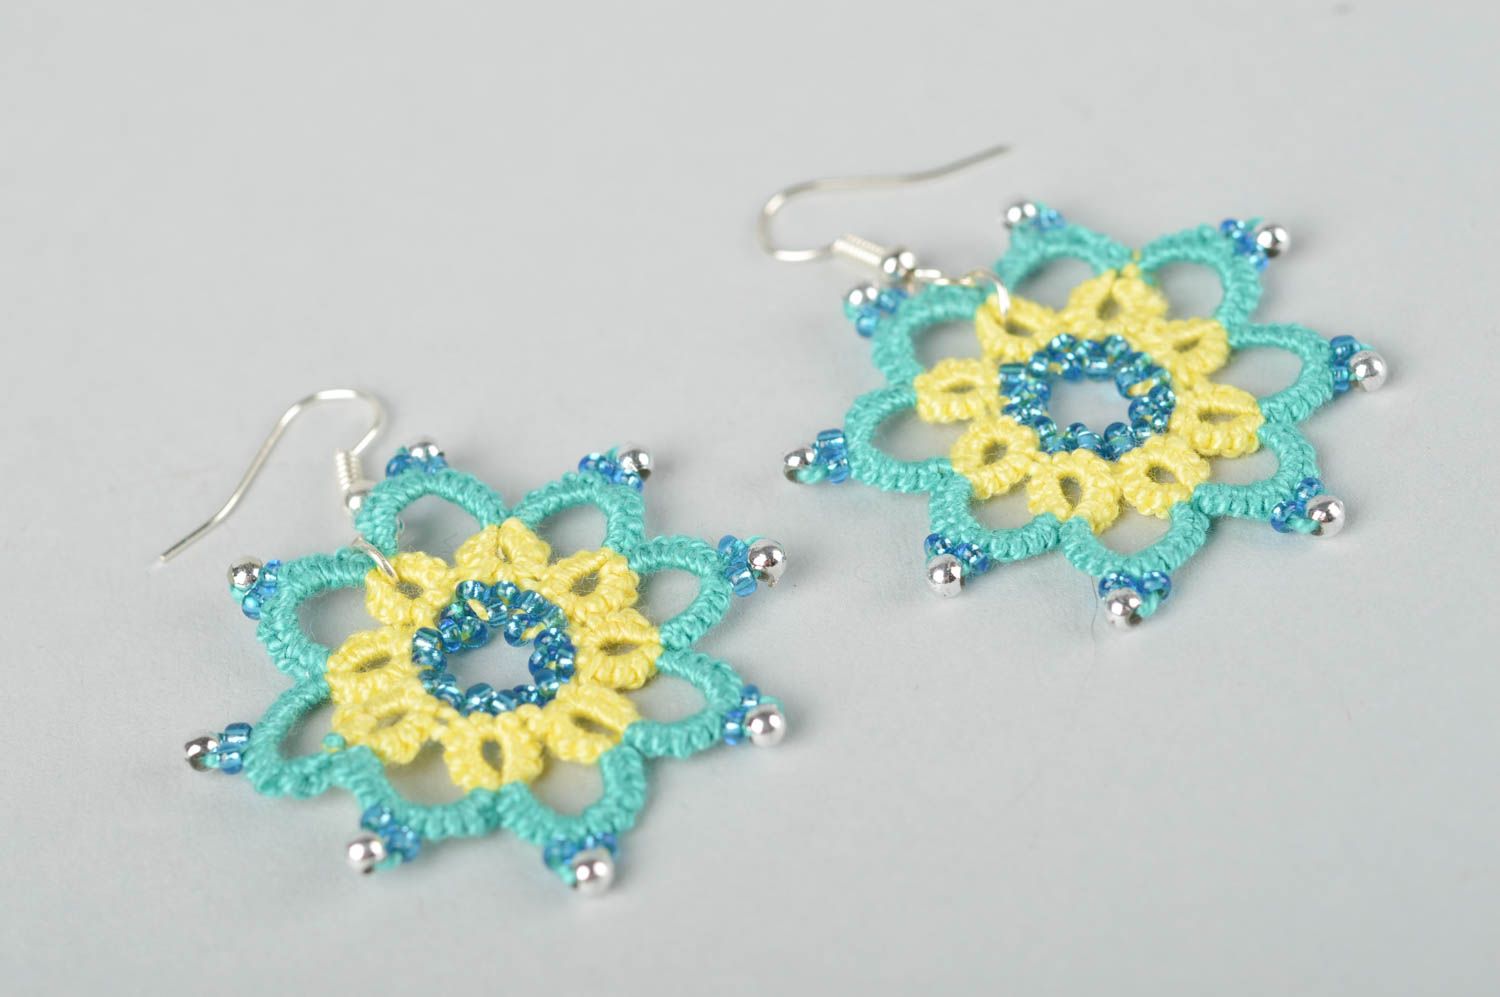 Beautiful handmade woven lace earrings textile earrings with beads gifts for her photo 2